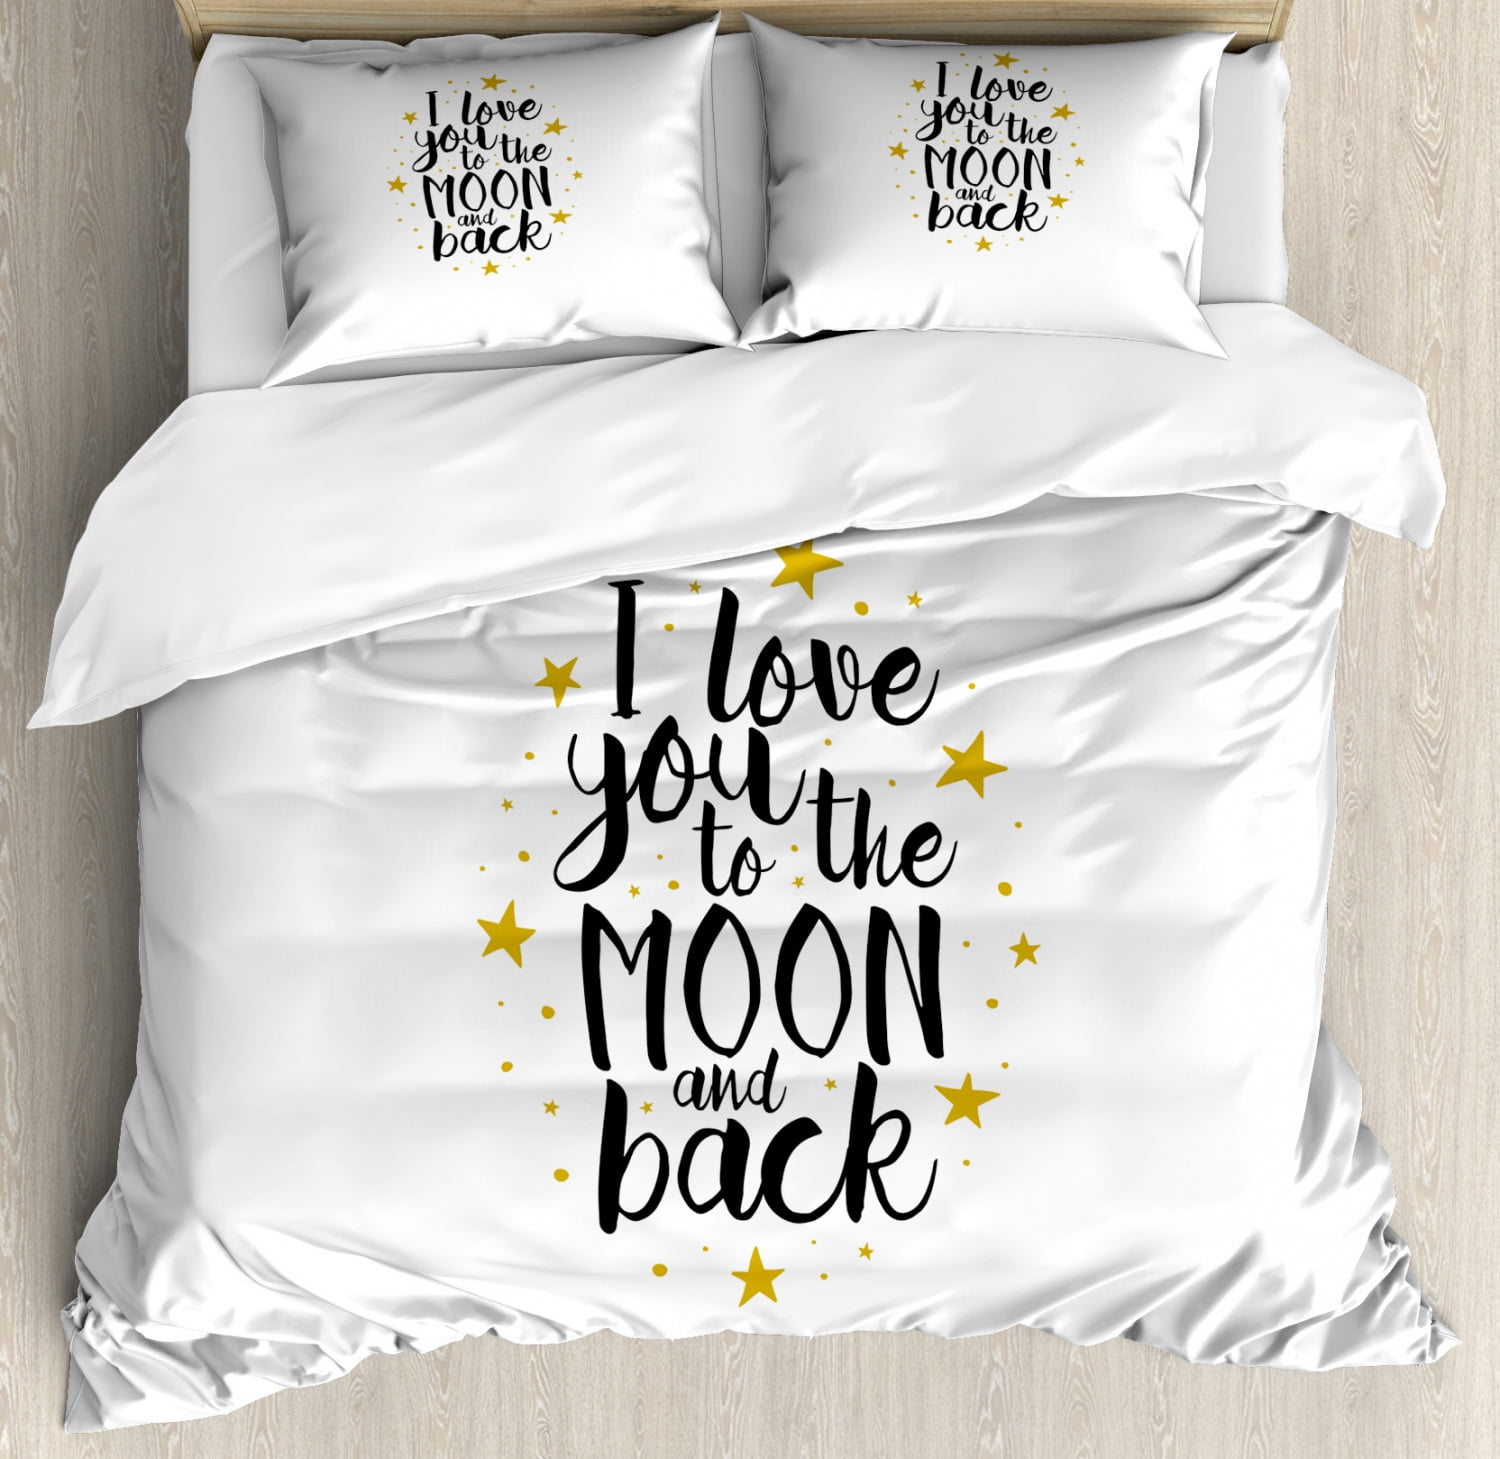 I Love You Duvet Cover Set Twin Queen King Sizes with Pillow Shams Bedding 